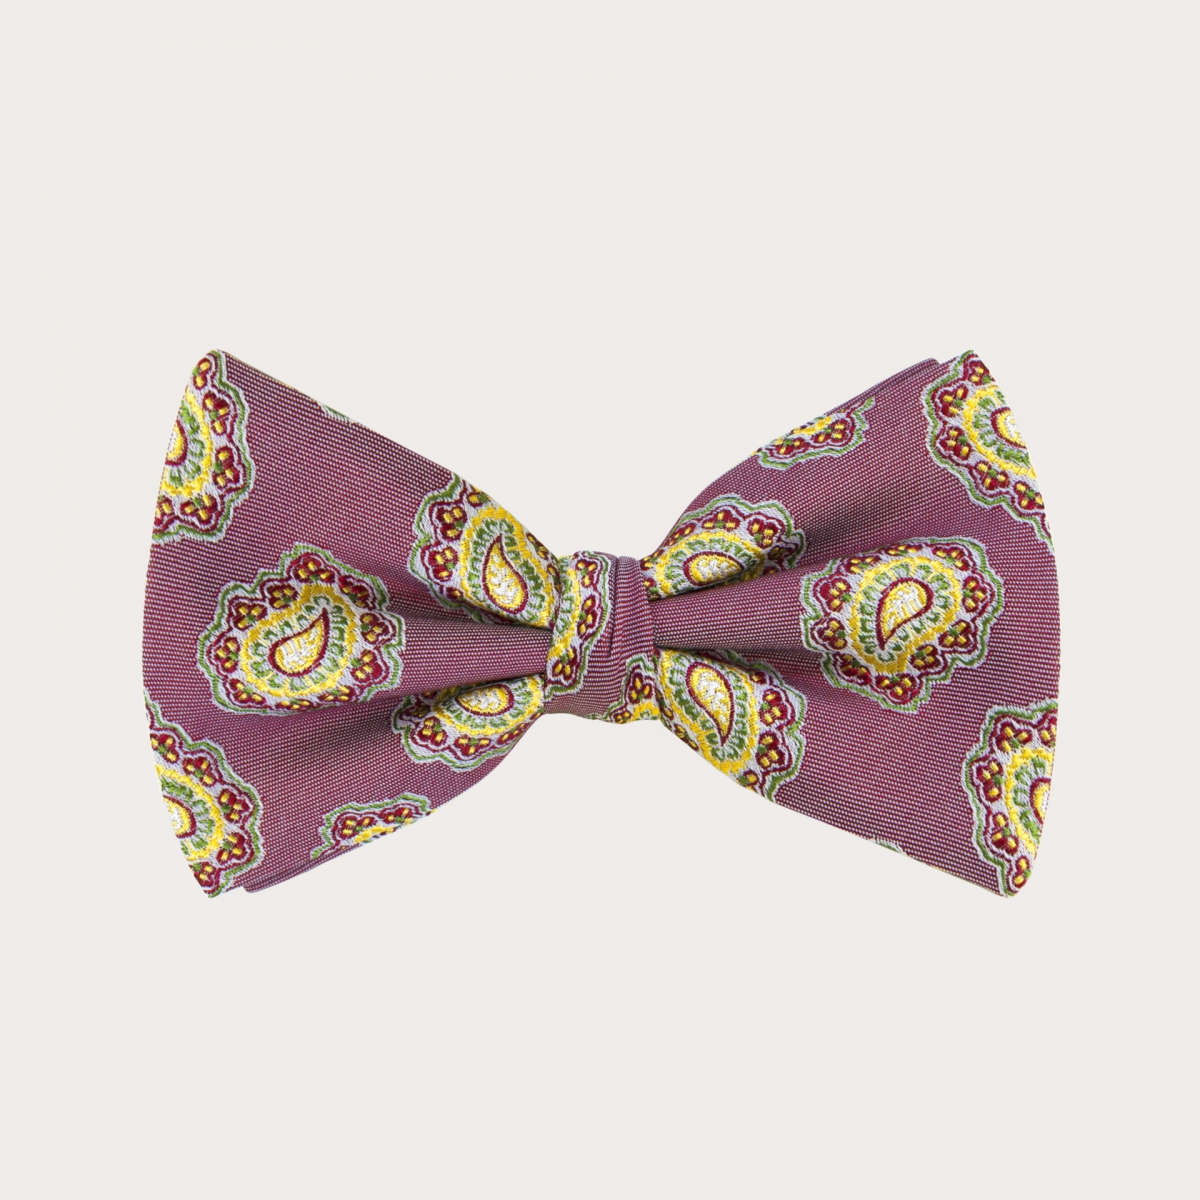 BRUCLE Coordinated braces and bow tie in silk, cherry red paisley pattern